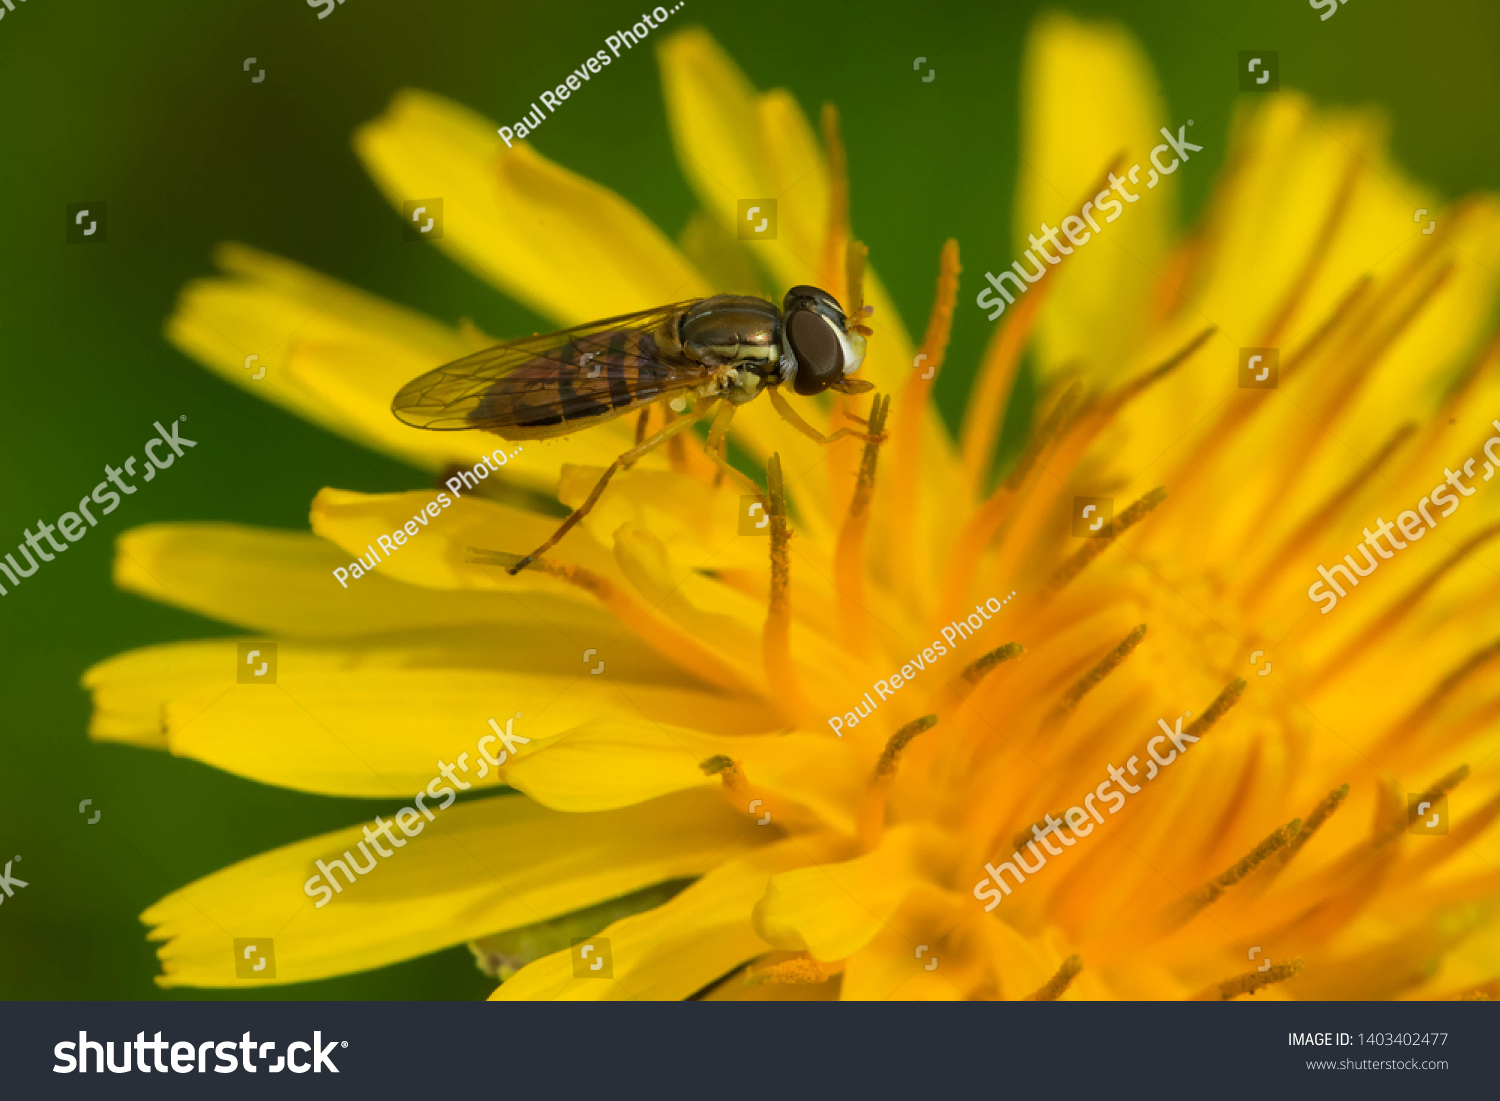 A Margined Calligrapher is collecting nectar from a yellow dandelion flower. Rosetta McClain Gardens, Toronto, Ontario, Canada. #1403402477